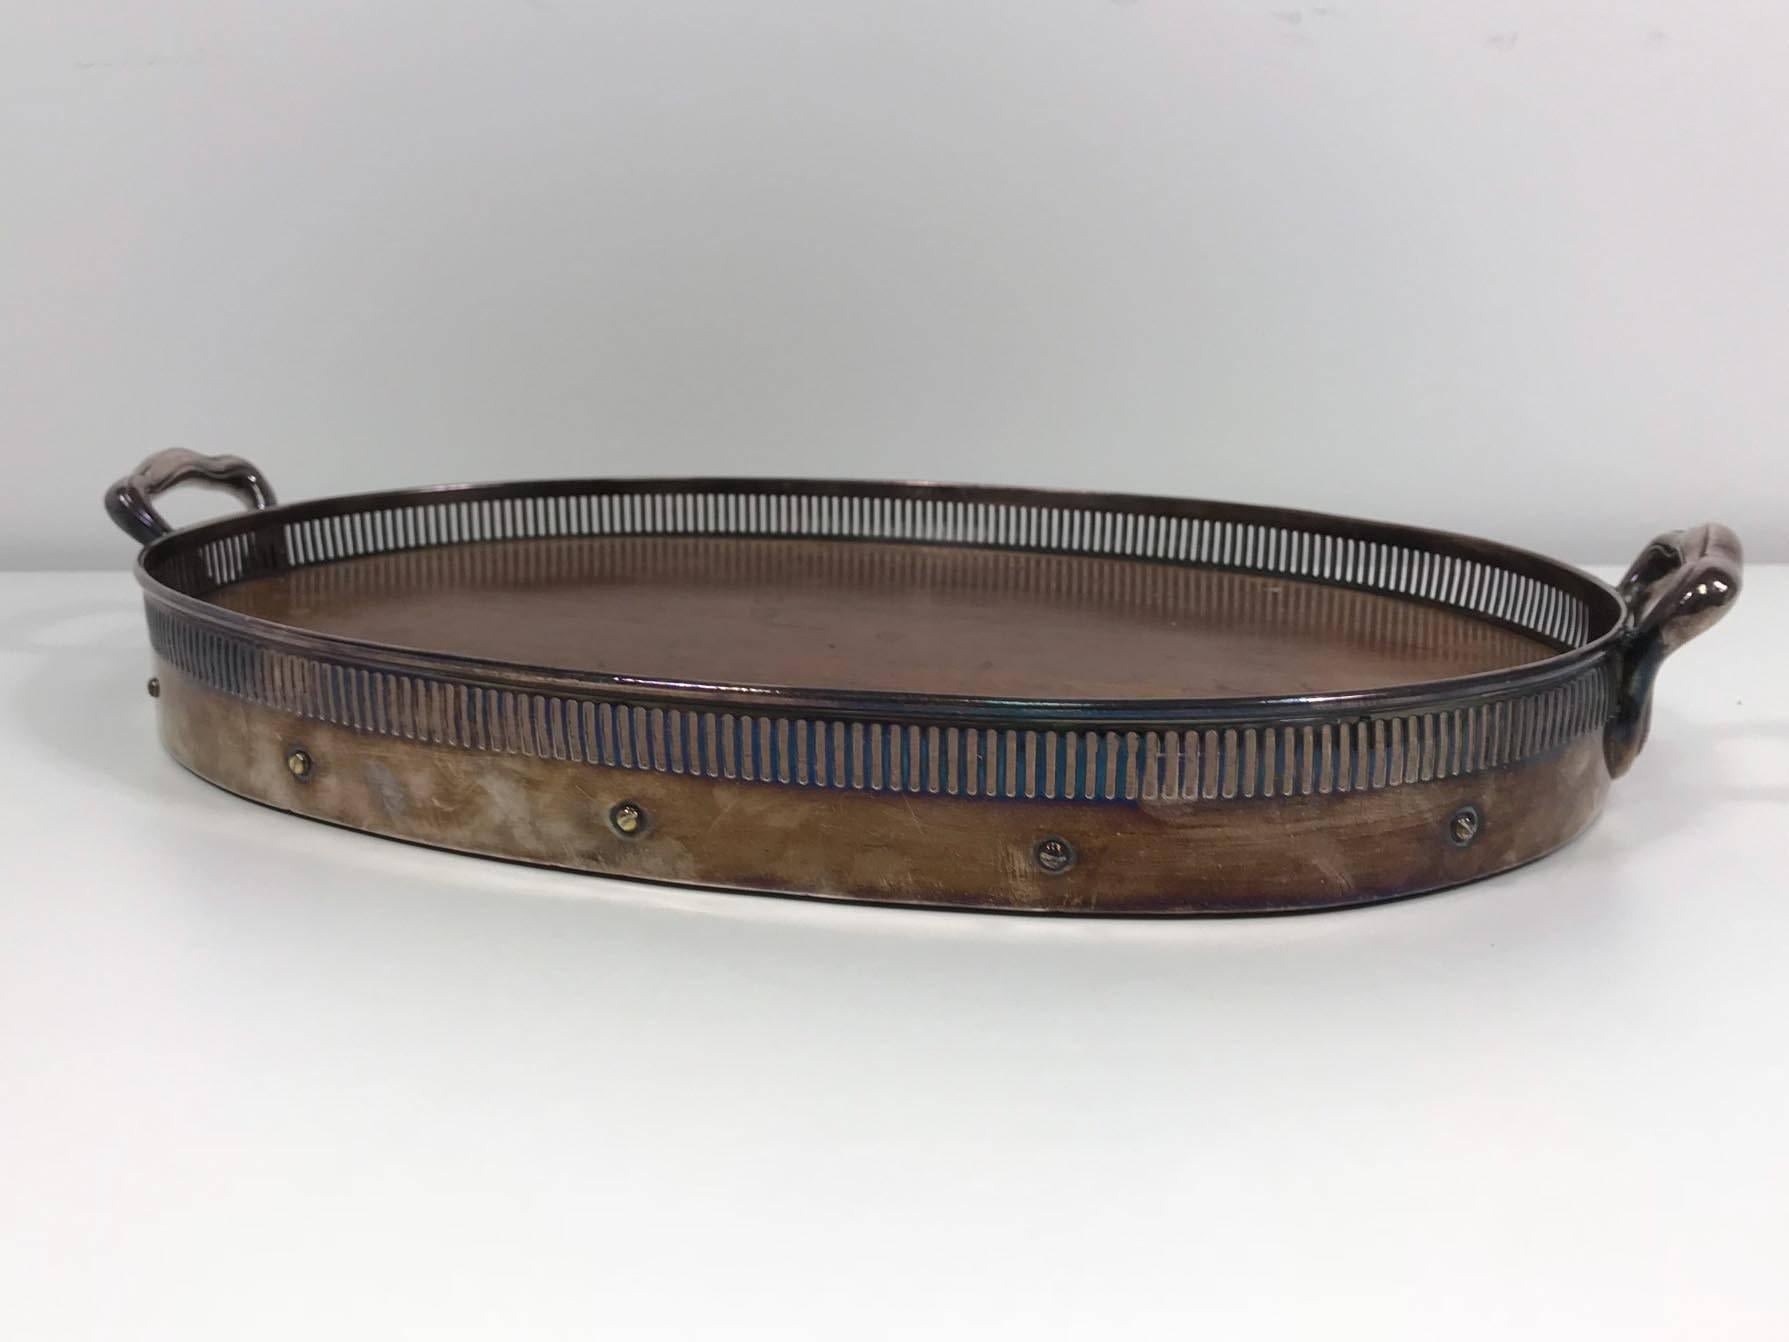 Oval tray by Simpson, Hall, Miller & Company. Silver handles and trim with wood insert. Original condition with natural patina. Note the wear on the surface of the wood, this could easily be restored.